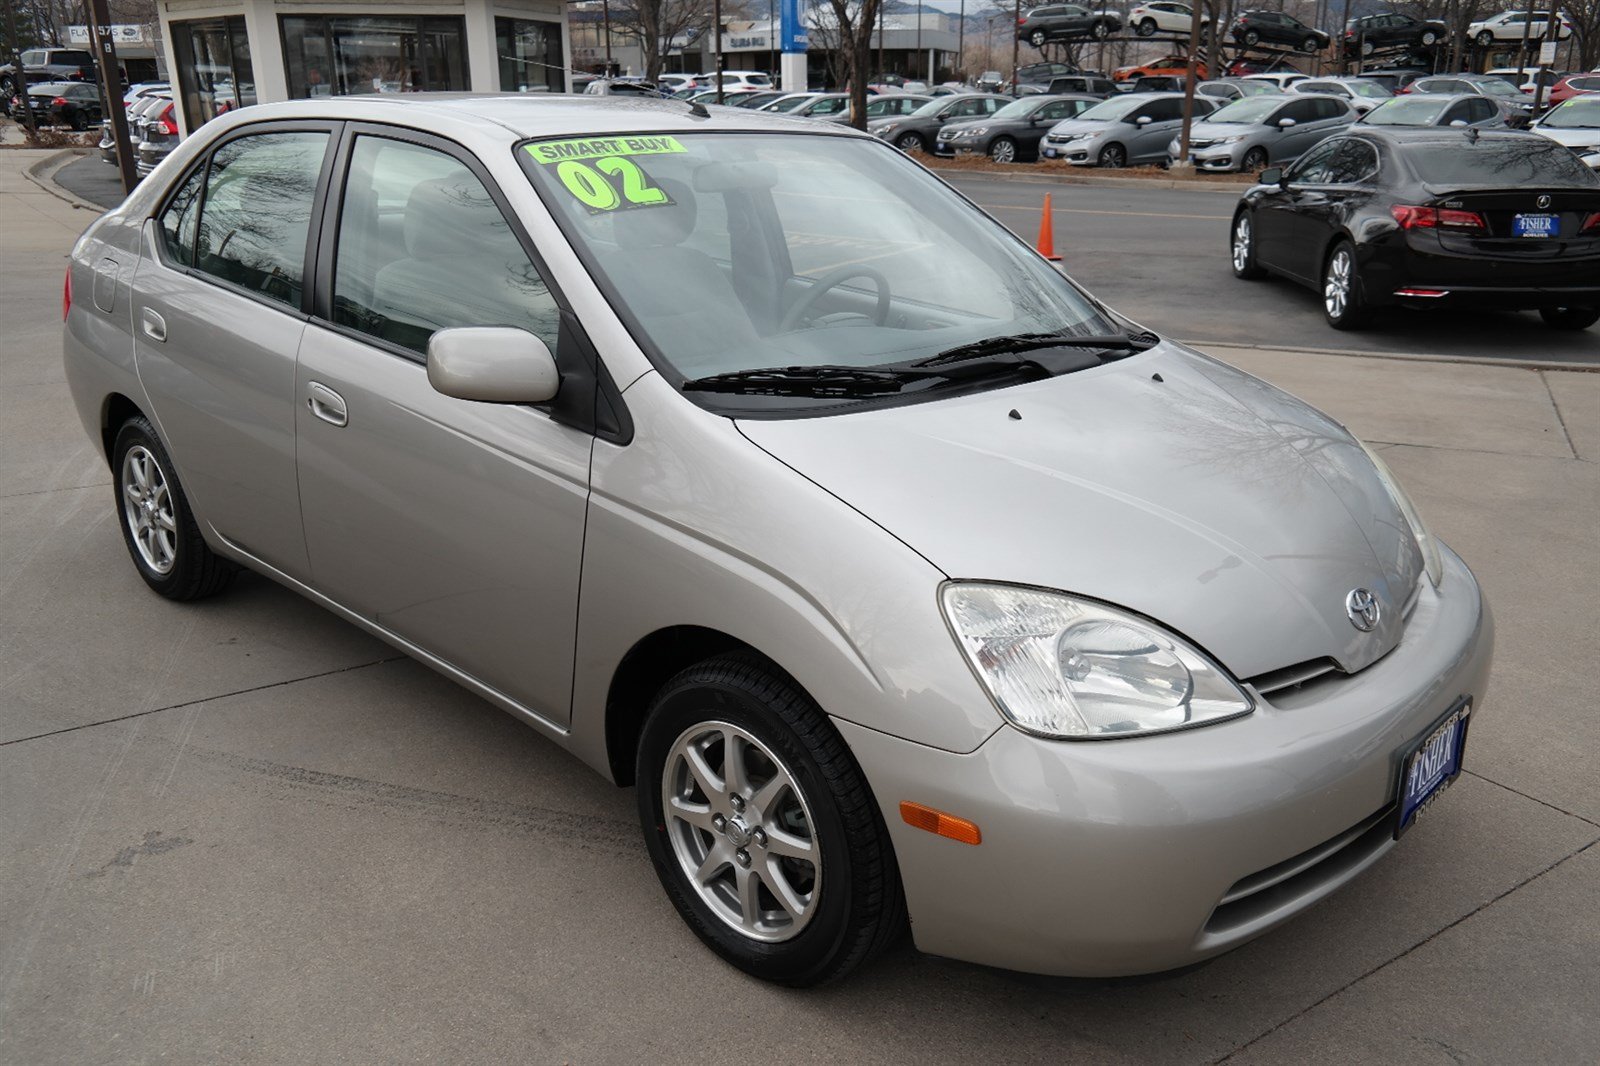 PreOwned 2002 Toyota Prius 4dr Sdn 4dr Car in Boulder